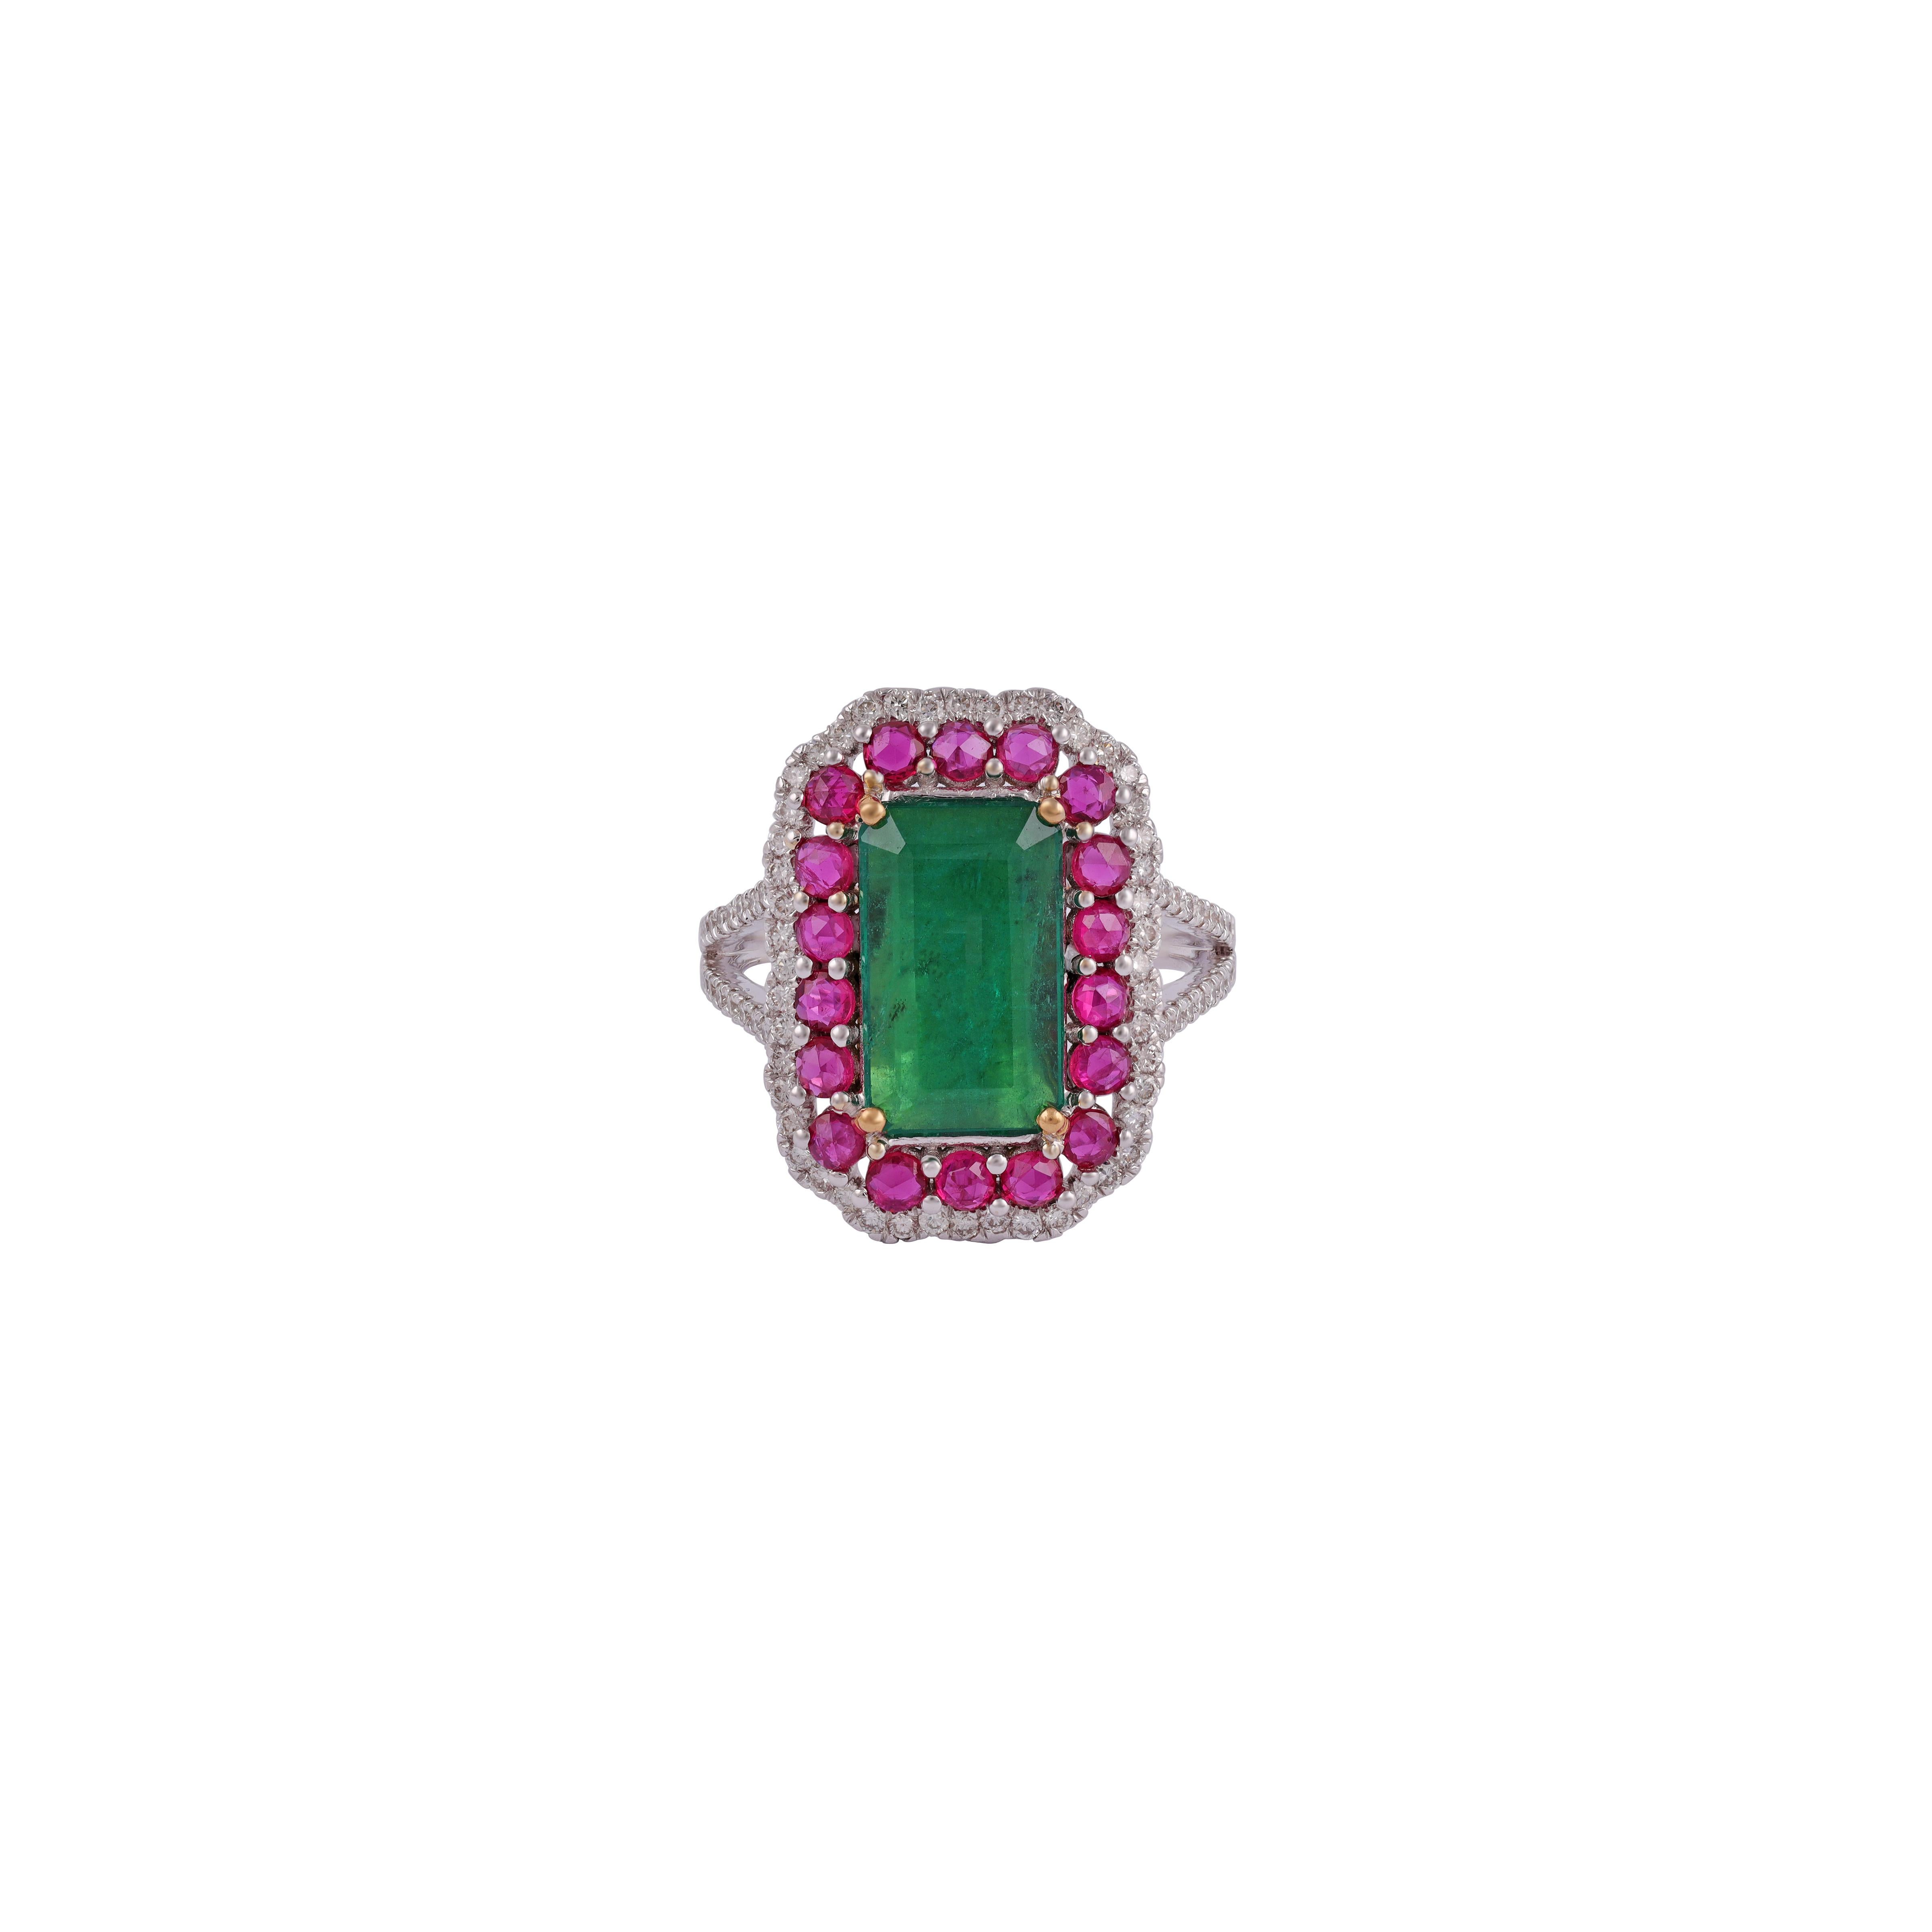 The Emerald set with brilliantly white and vibrant natural diamonds as well as rich red round cut rubies. Finished with dazzling diamonds and emeralds & Ruby's  provides the perfect backdrop for a diamond . 

Eye-catching and classically